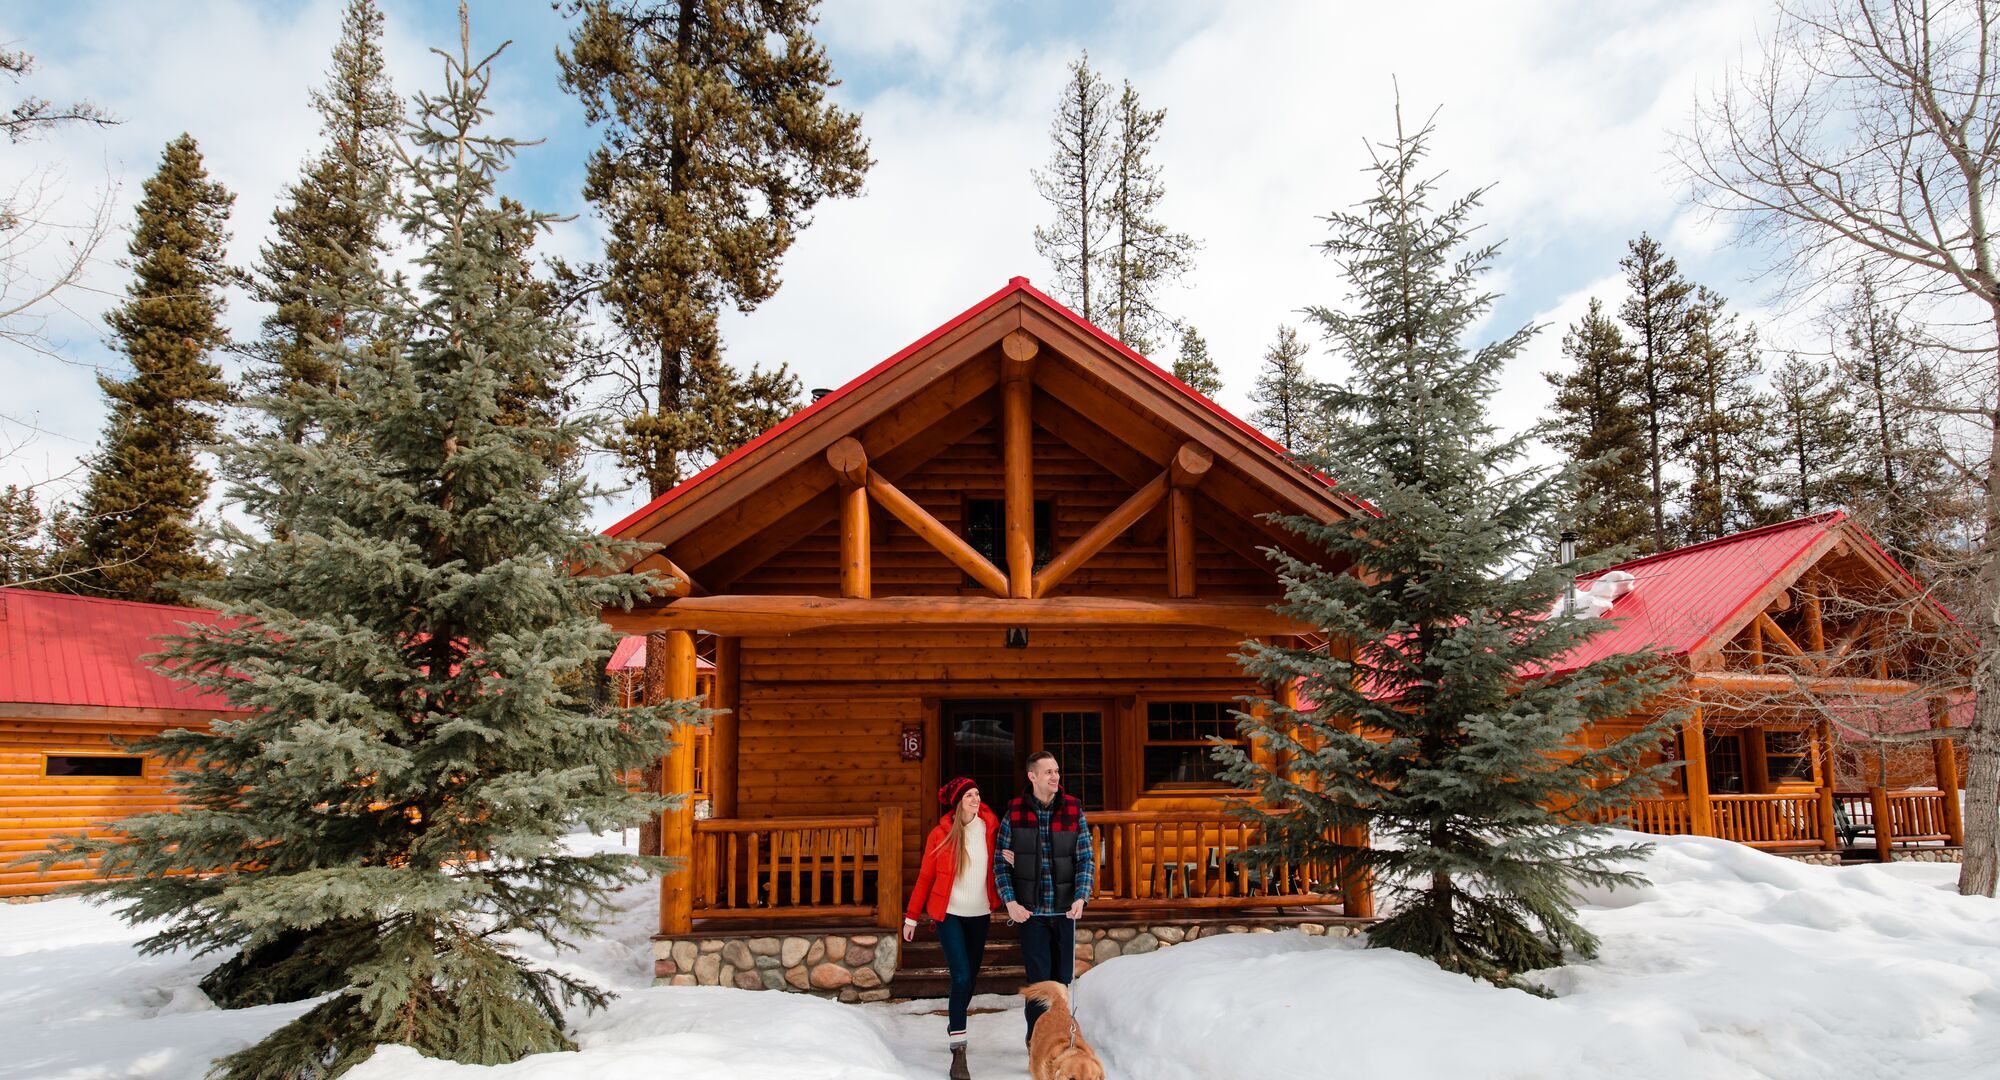 A couple leaves a snowy cabin in the winter at Baker Creek in Banff National Park.